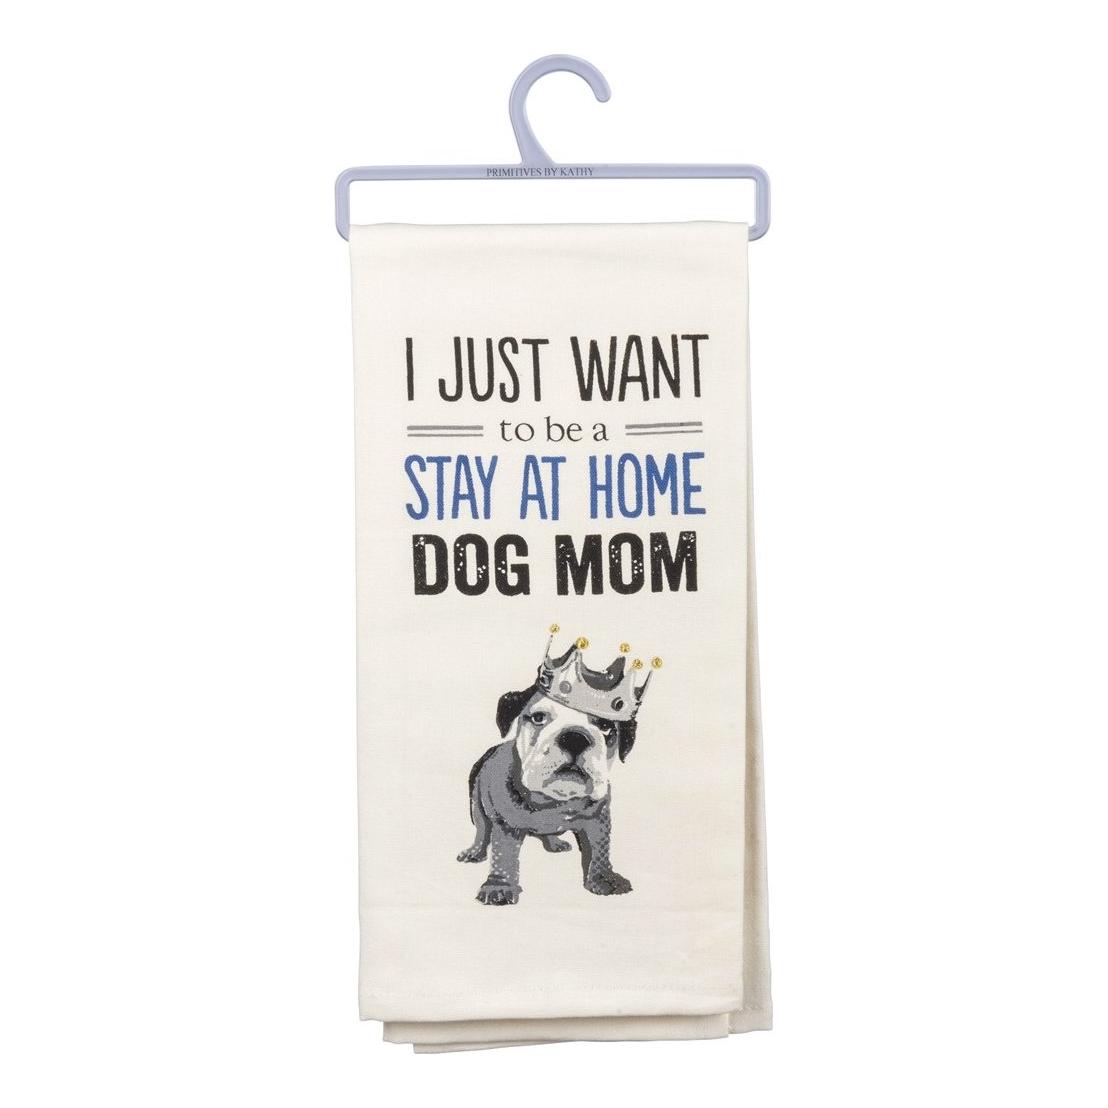 The Bullish Store - The Bullish Store - I Just Want to Be a Stay at Home Dog Mom Dish Towel